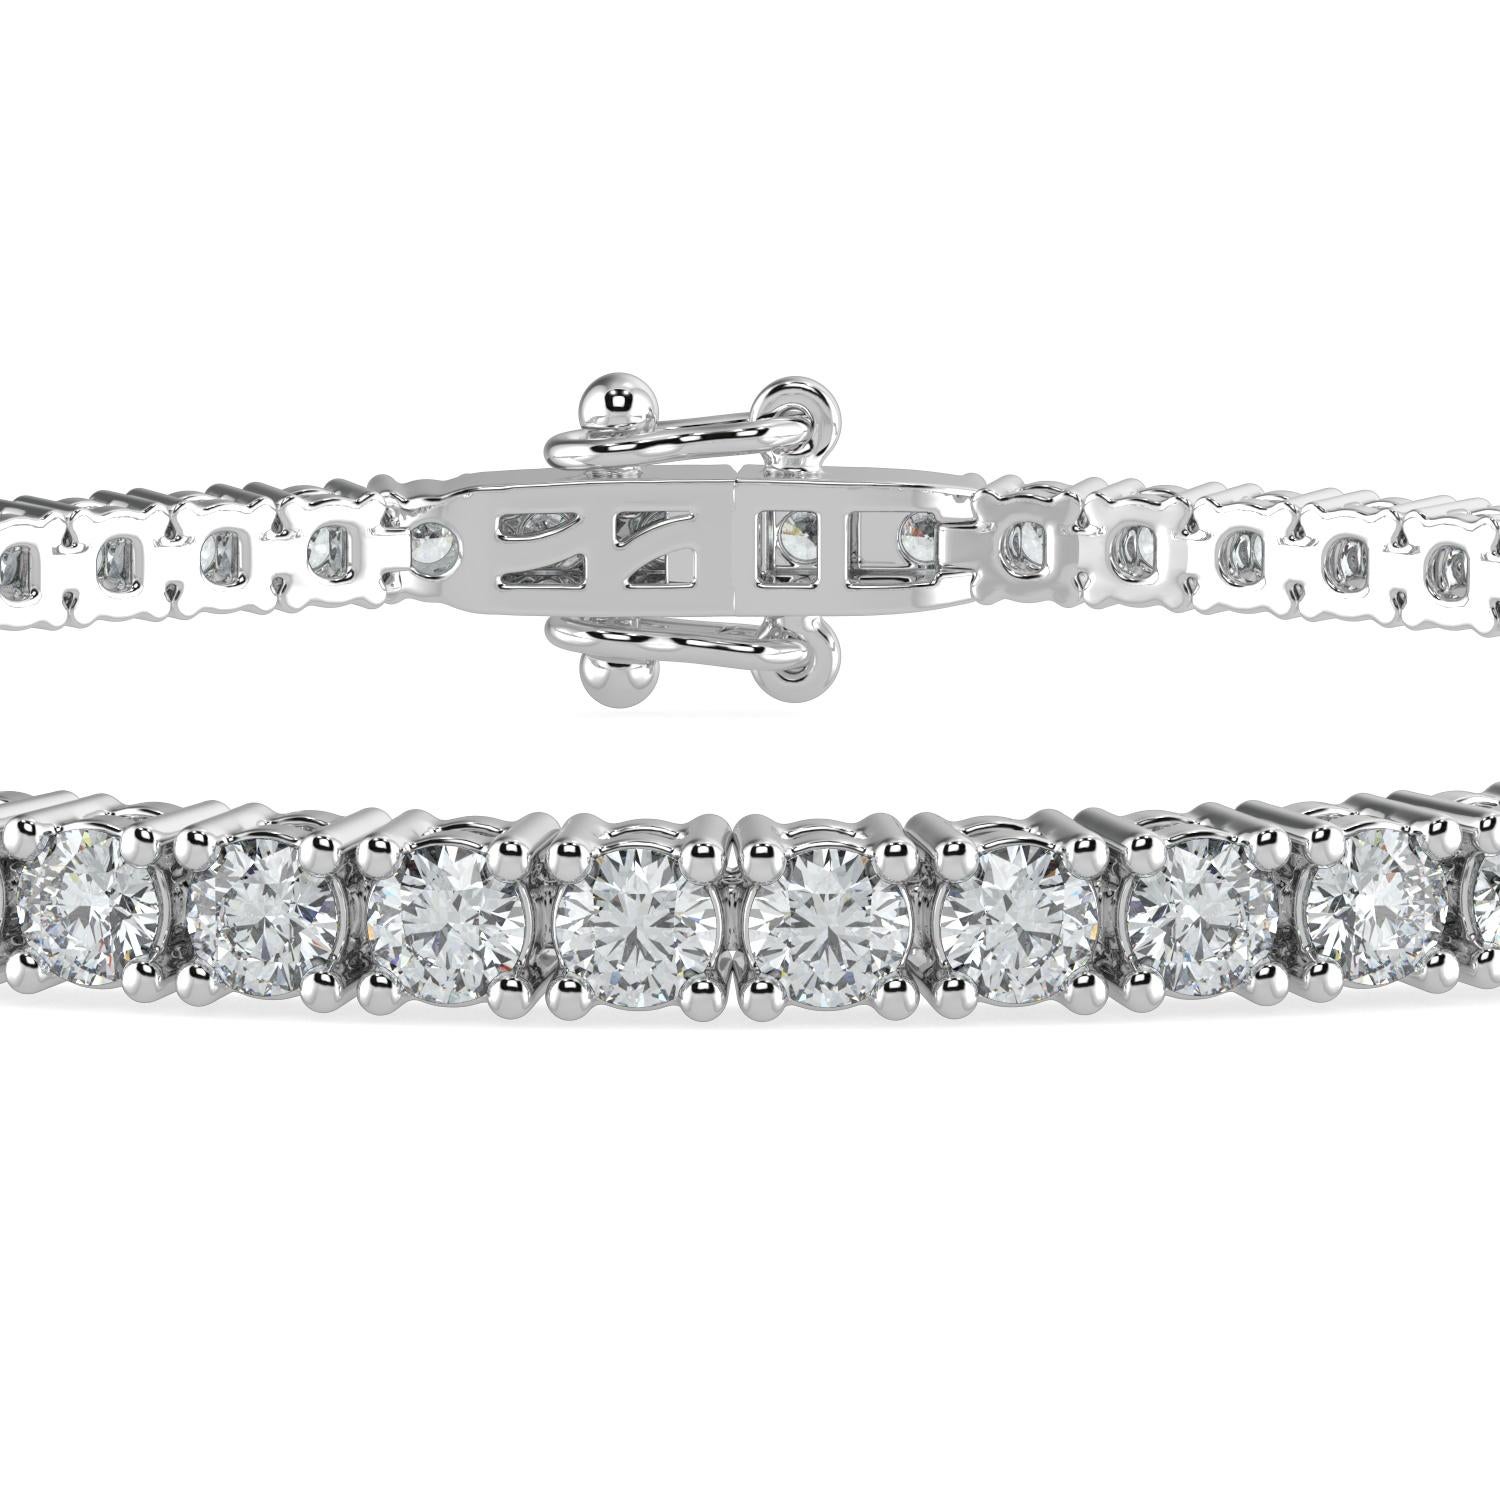 12.00 Carat Round Cut GH-I1 Natural Diamond Classic Tennis Bracelet 4 Prong 14K White Gold for Women

Specification
Brand: AAMIAA
Length: 7 Inches 
Color: GH
Carat Weight:12.00CTW
Clarity: I1

LUXURIOUS AND LASTING- Our bracelets are a luxurious and